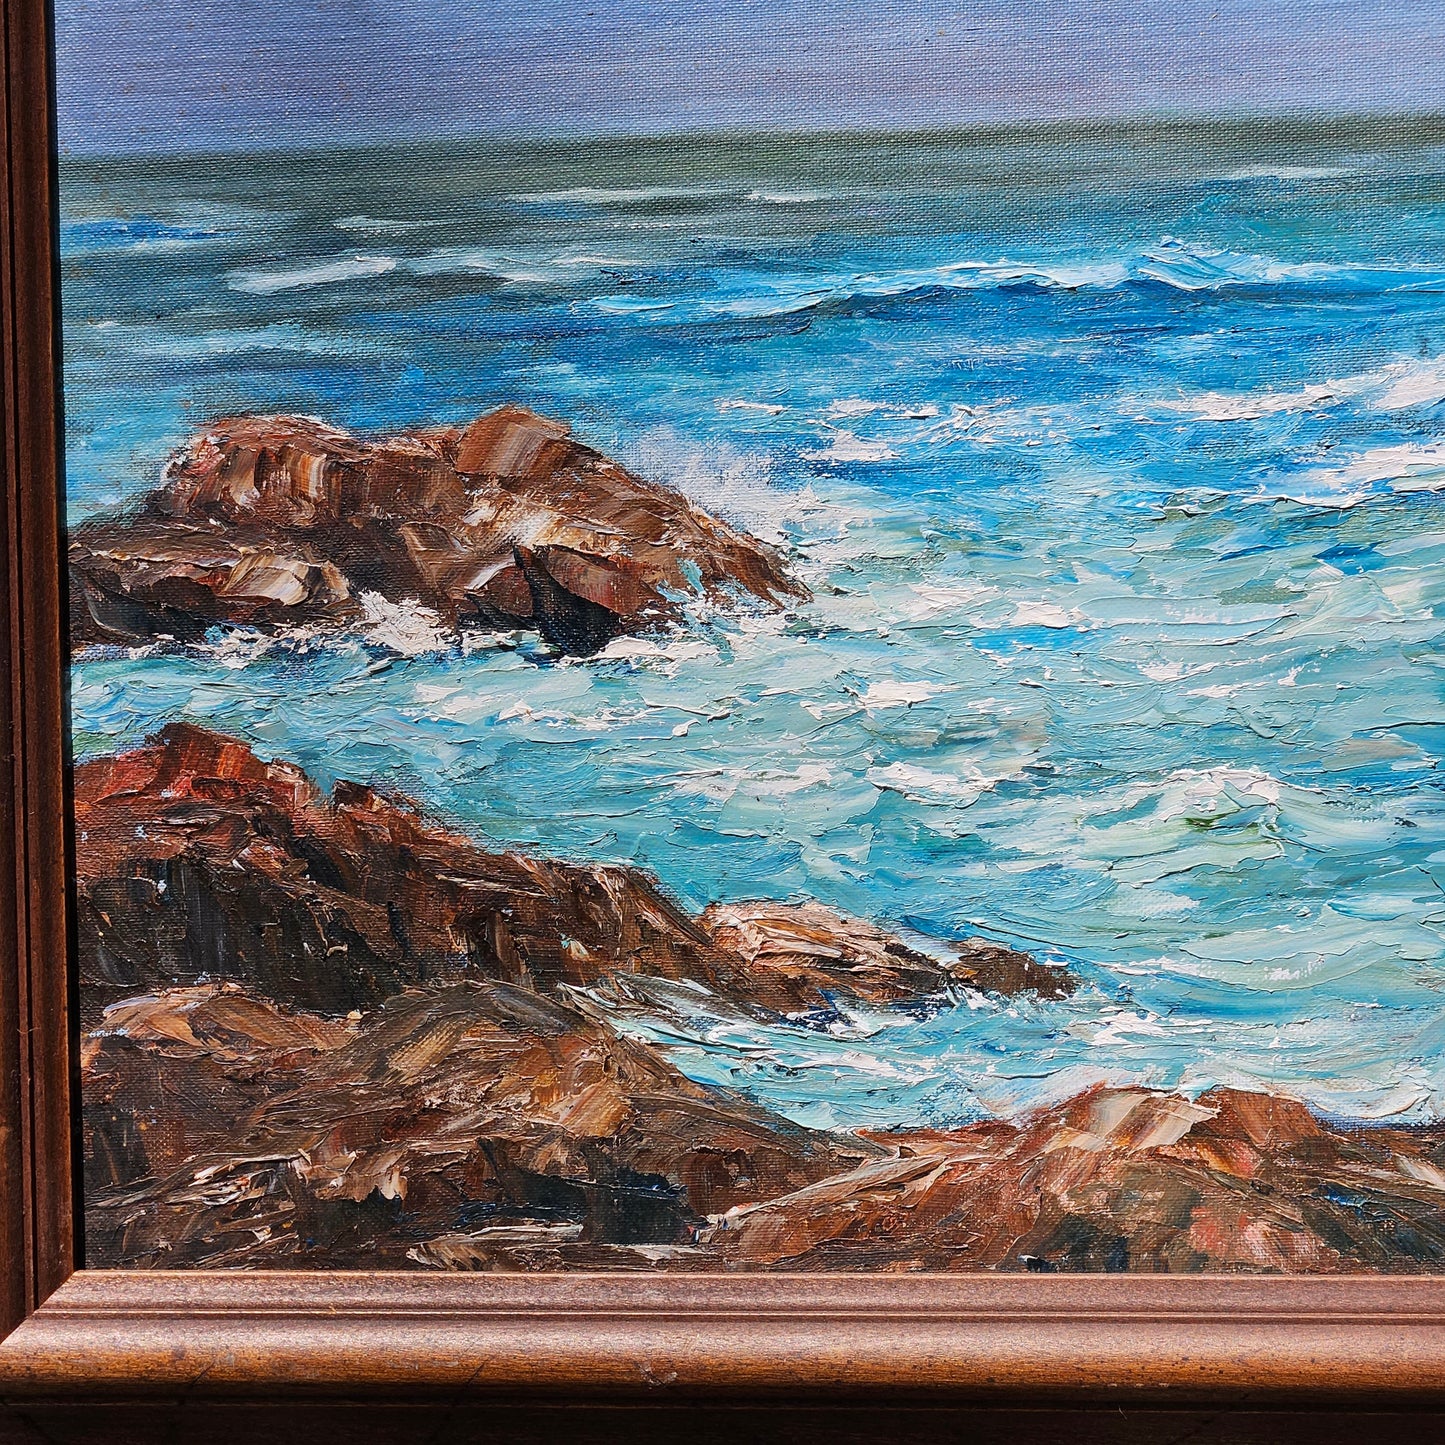 Seascape Painting by Dolores Barnes "Strawberry Granite"